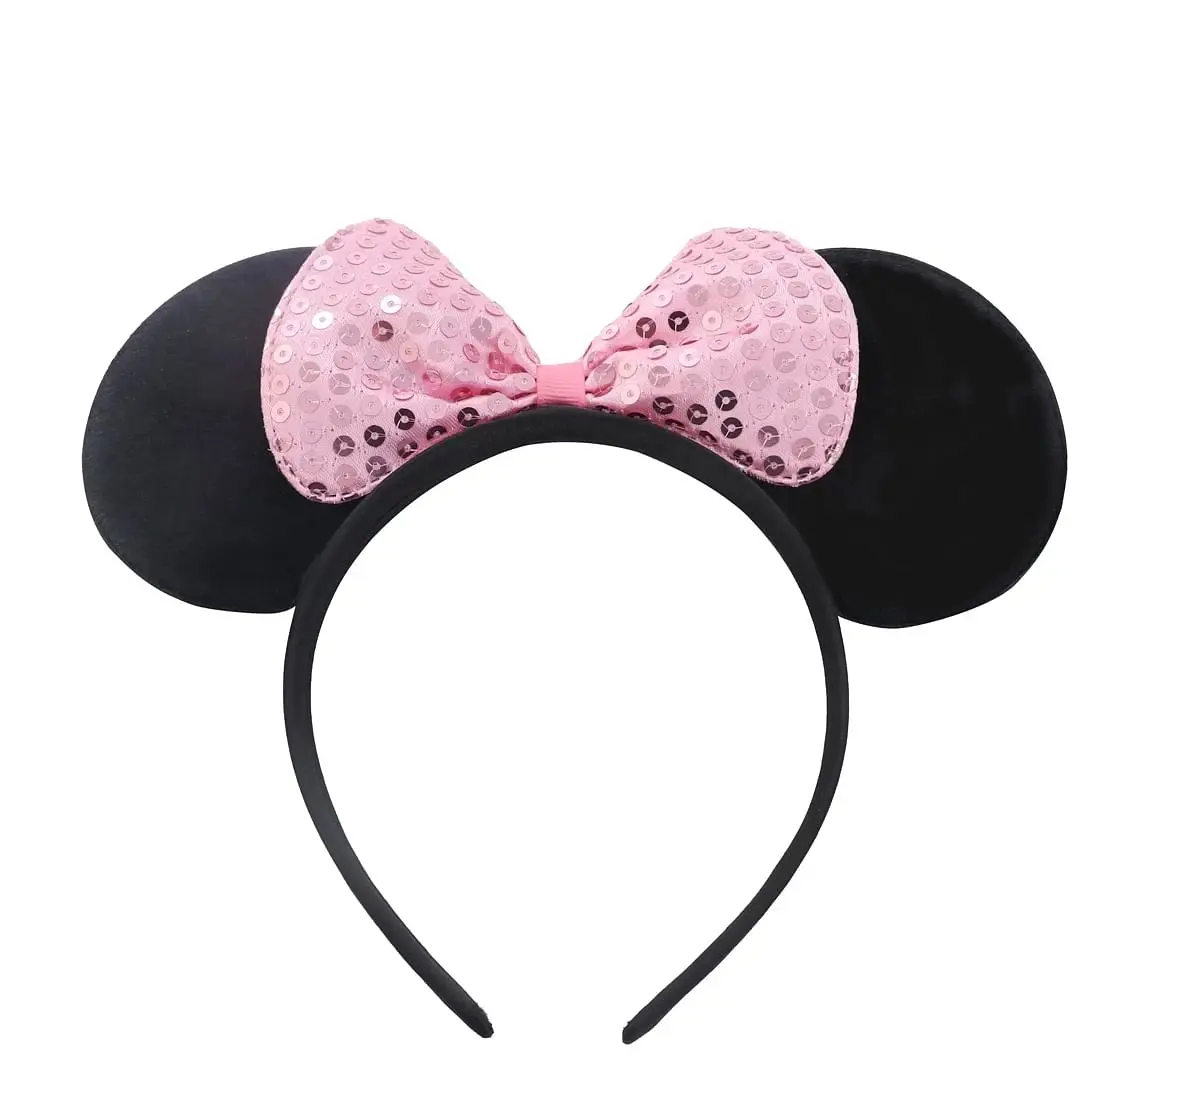 Minnie Mouse Headband by Li'l Diva With A Pink Sequined Bow For Girls 3 Years And Above, Black